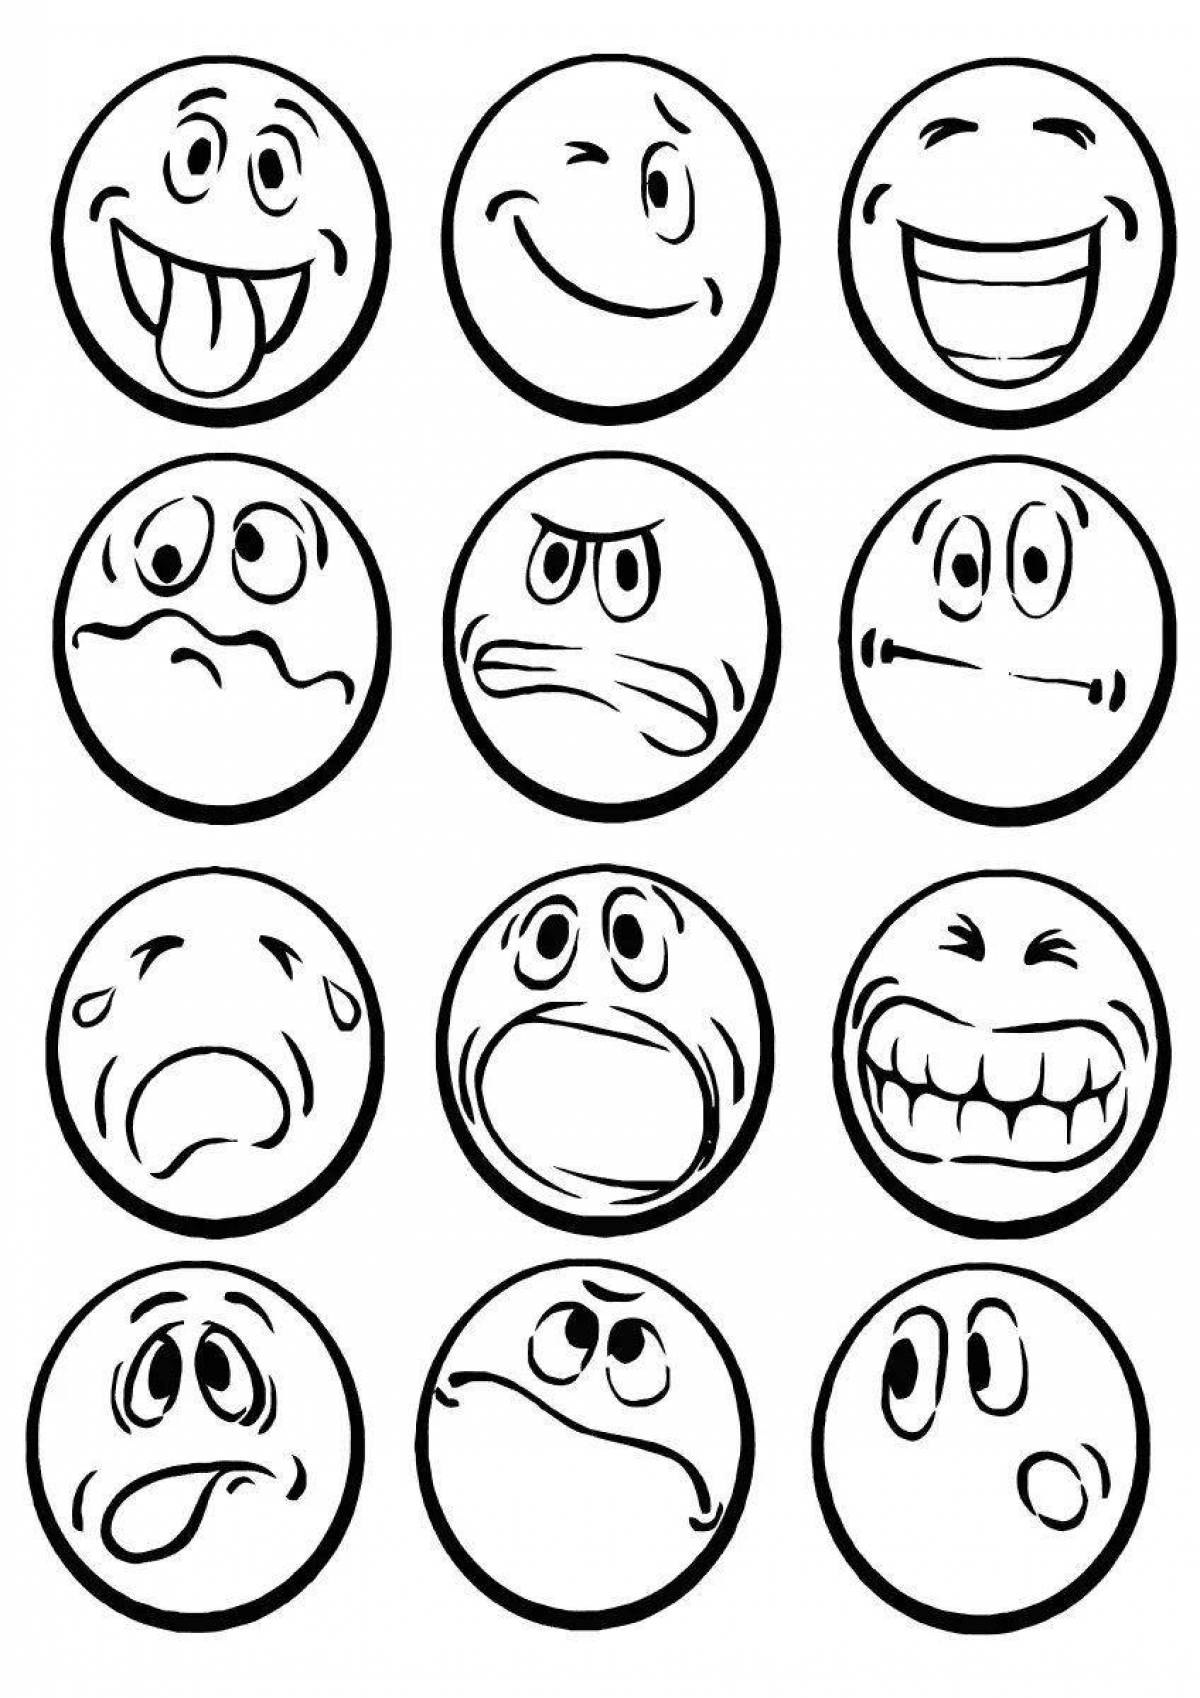 Amazing emoji coloring page for kids